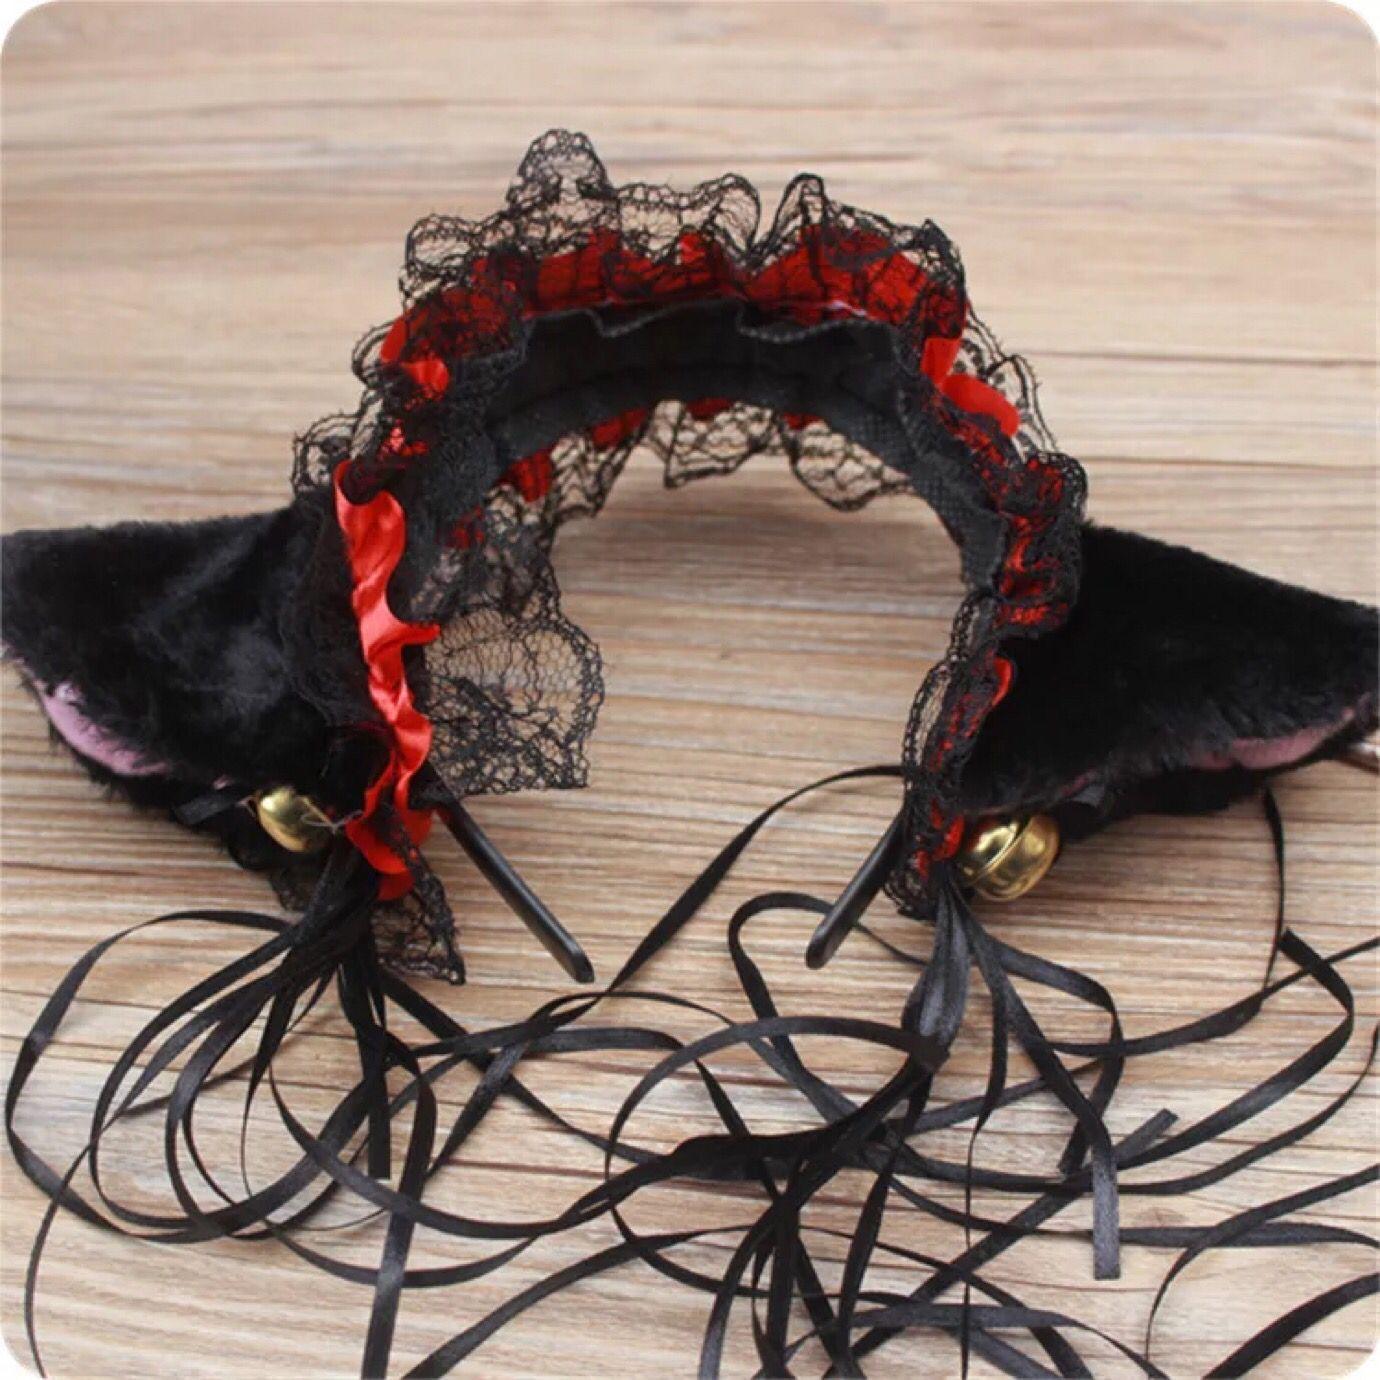 Cat Ears with Lace and Bell - Black with Red Highlight Headband - Femboy Fatale